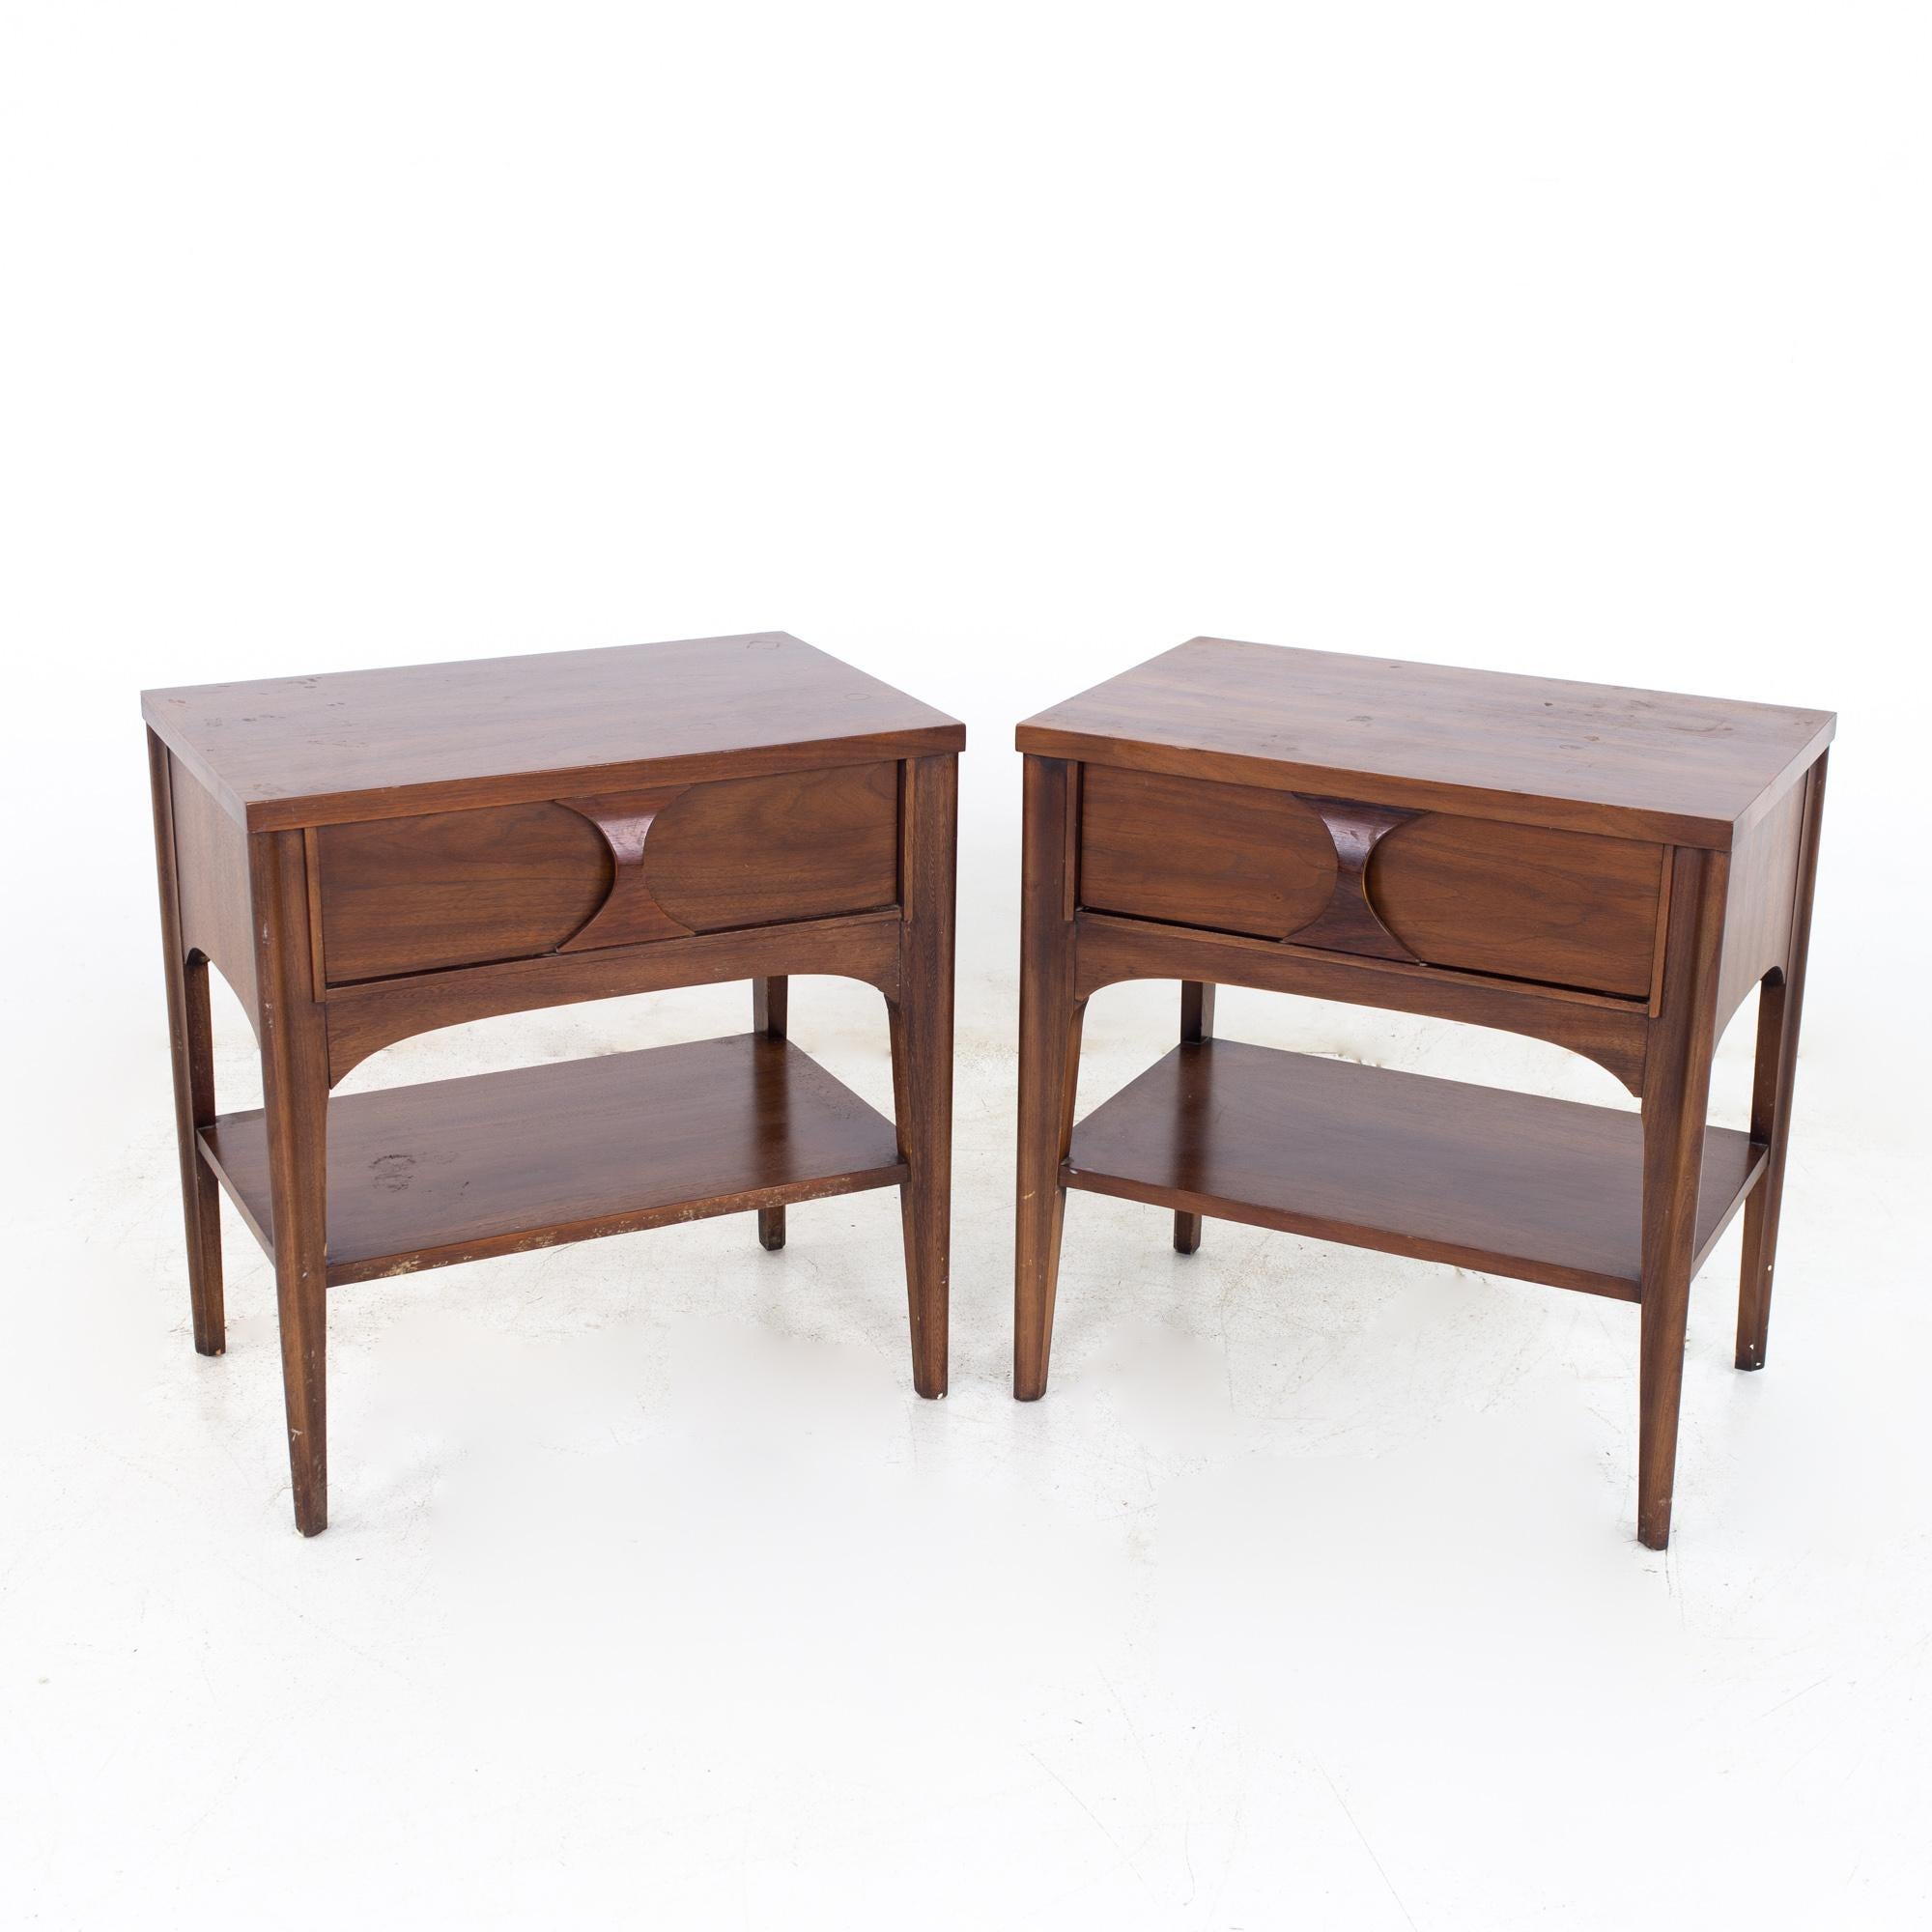 Kent Coffey Perspecta mid century walnut and rosewood nightstands - a pair

Each nightstand measures: 23 wide x 15 deep x 24 inches high

All pieces of furniture can be had in what we call restored vintage condition. That means the piece is